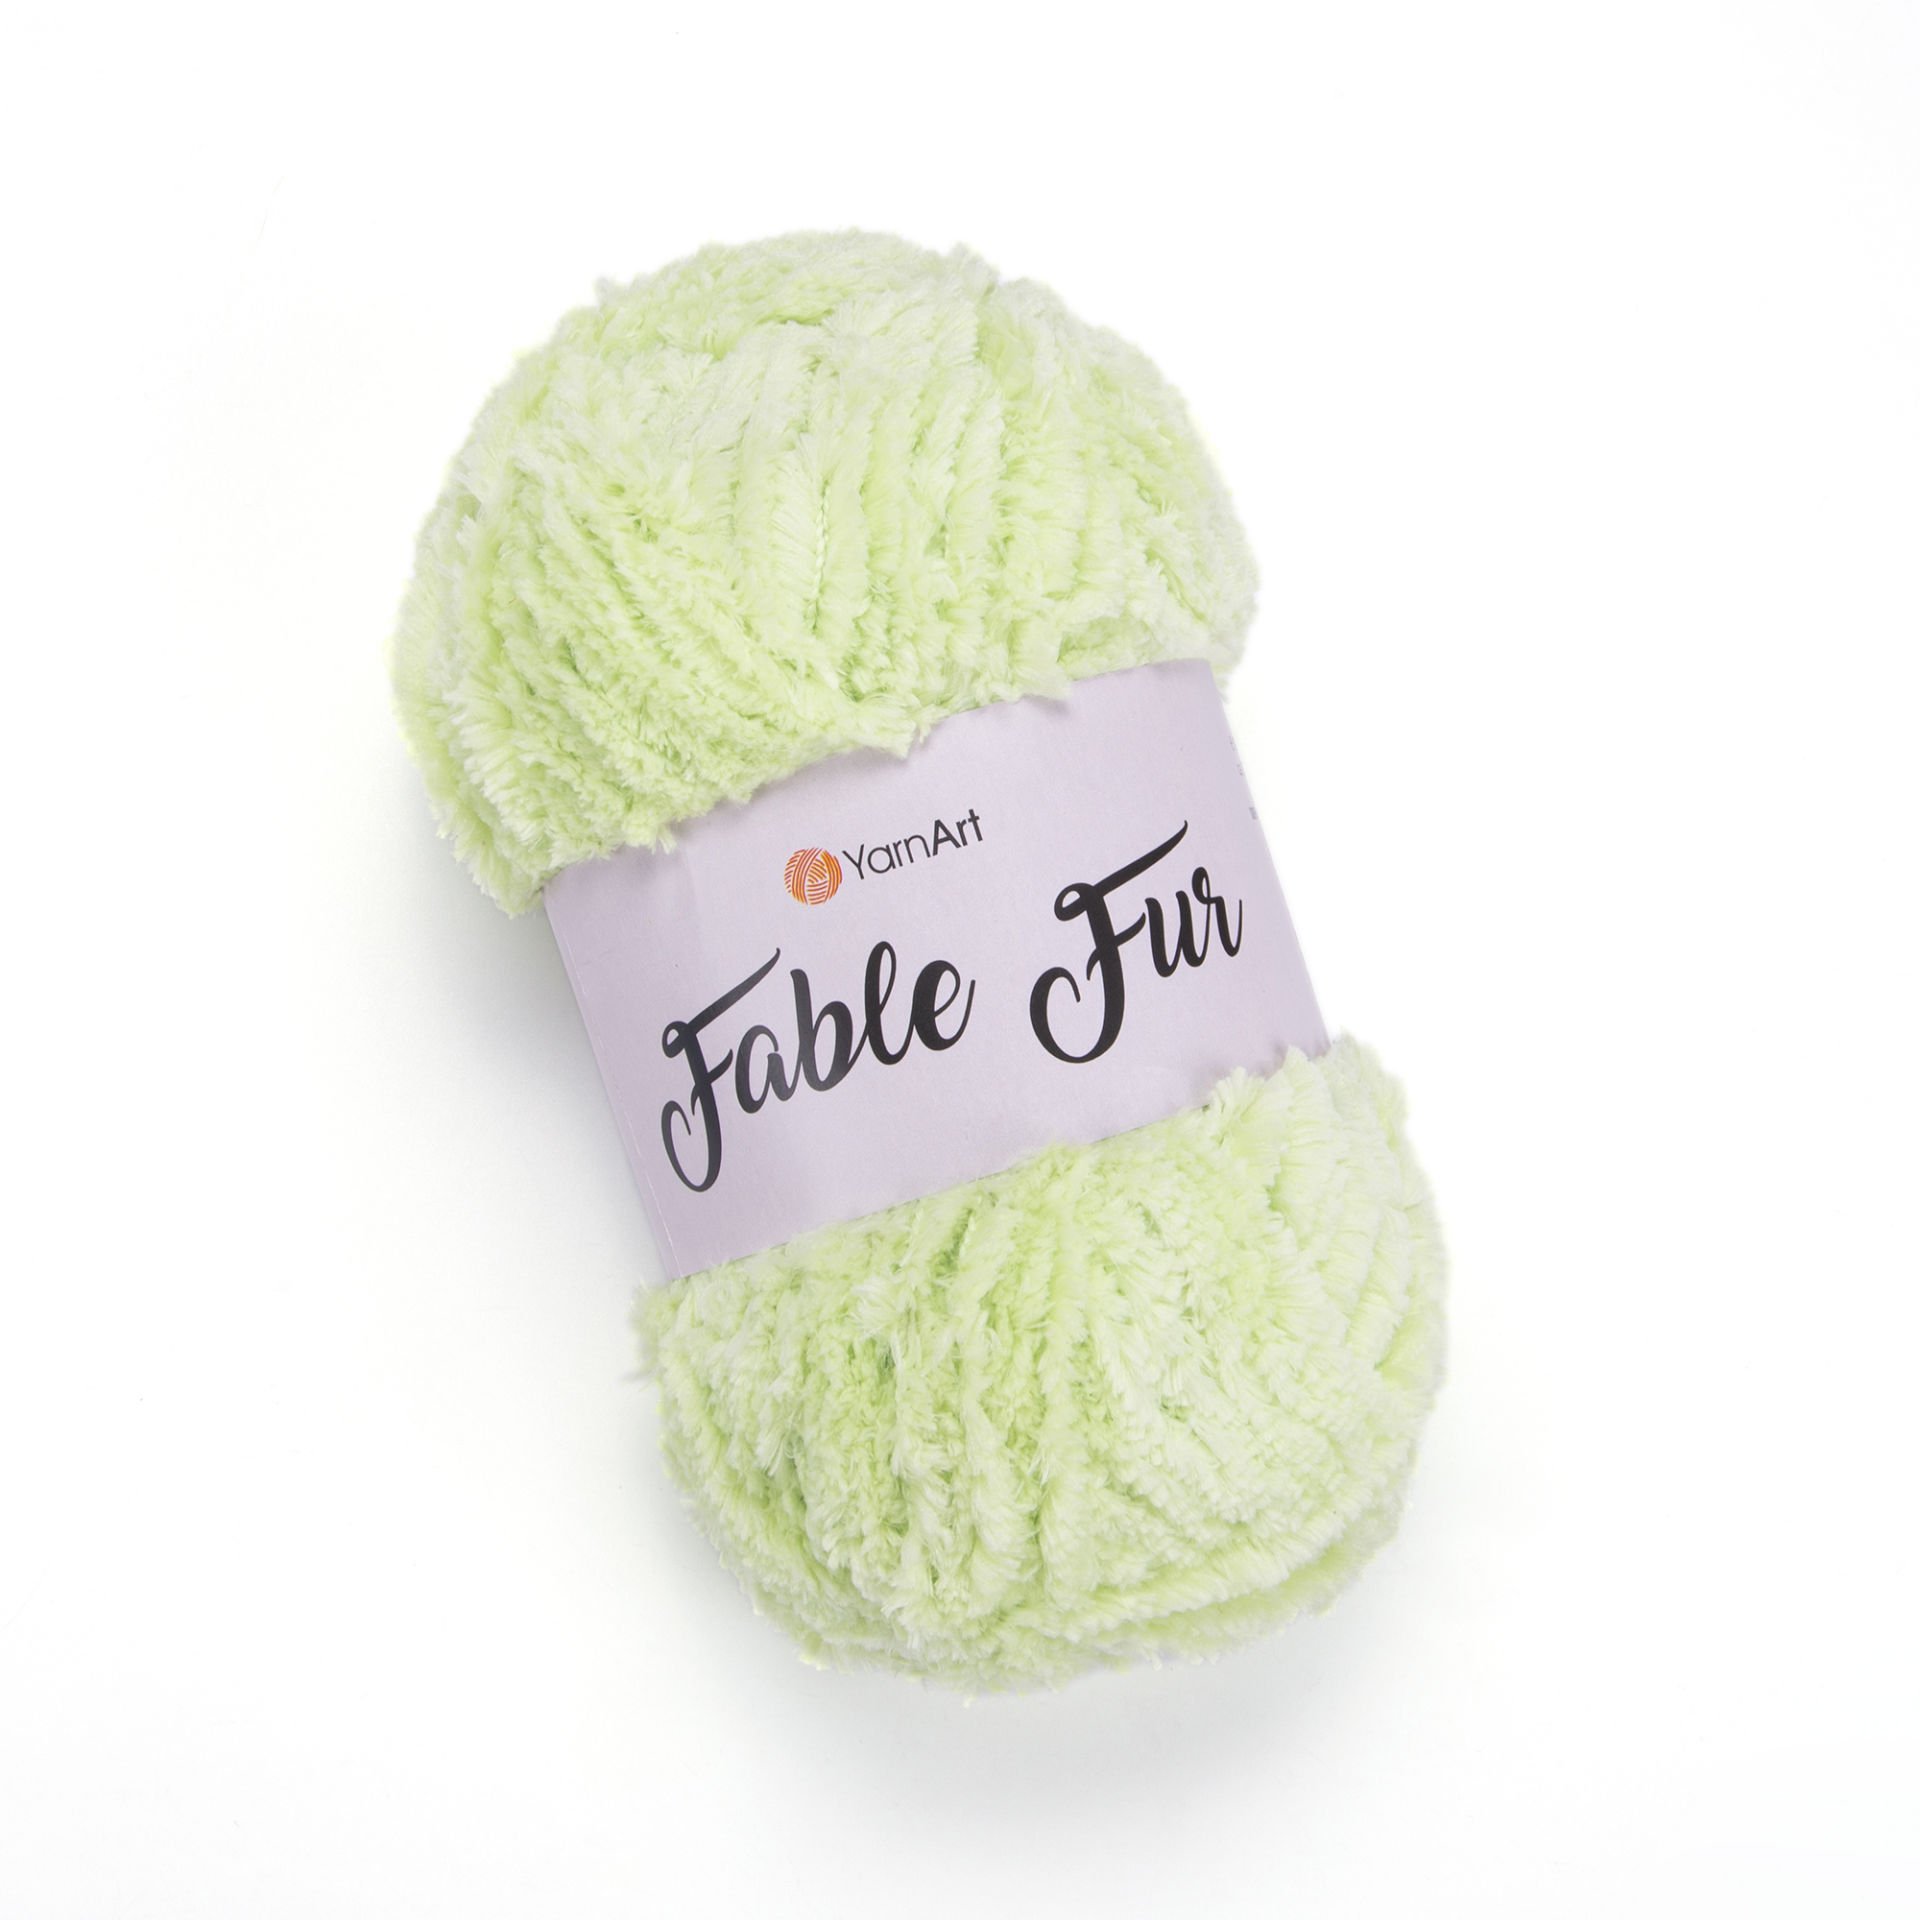 FABLE FUR YARN REVIEW + How to Crochet with Faux Fur Yarn! 